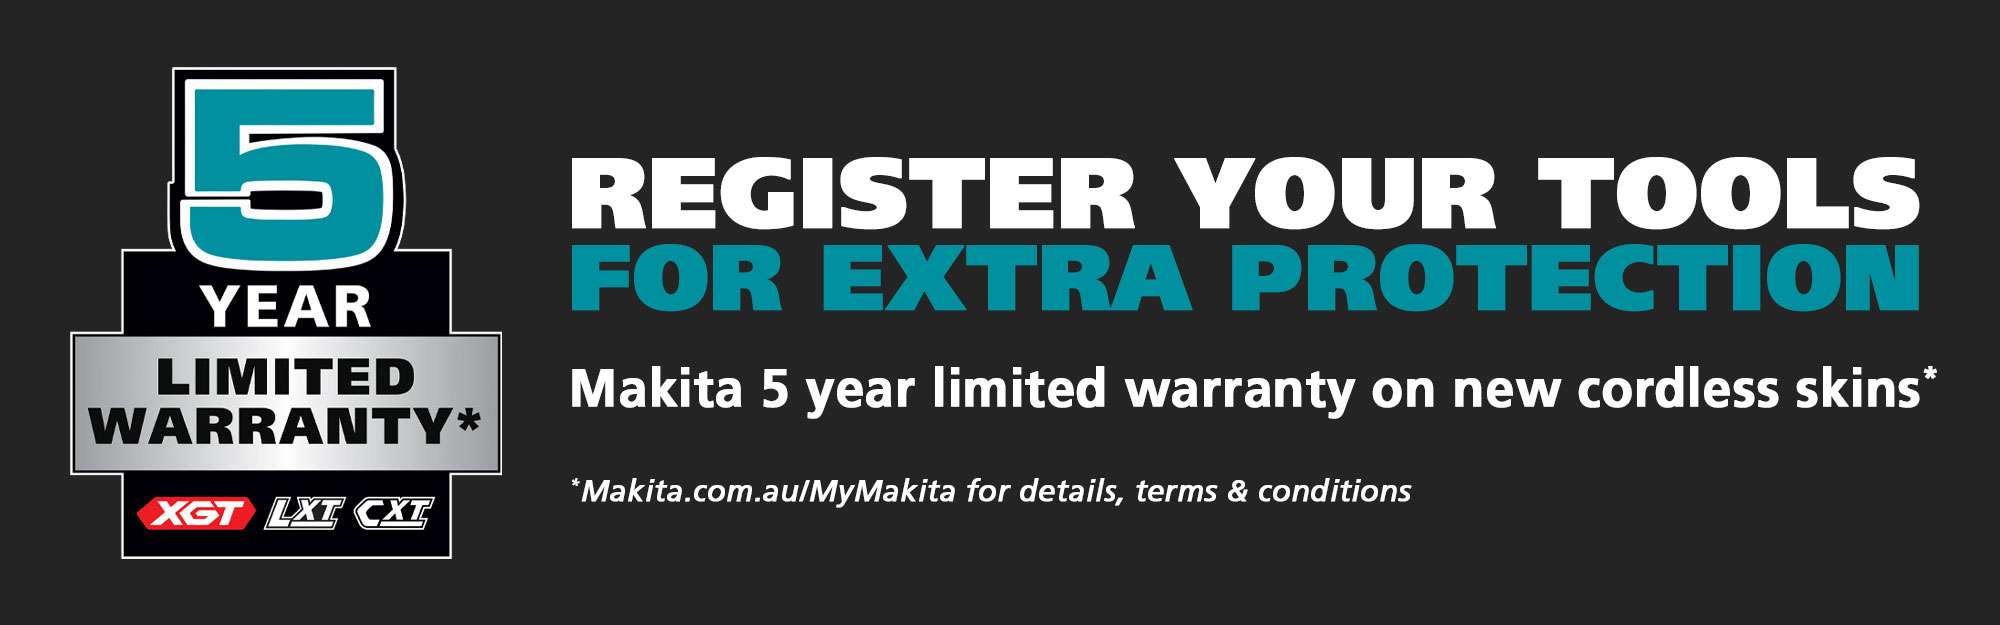 Register your tools for extra protection